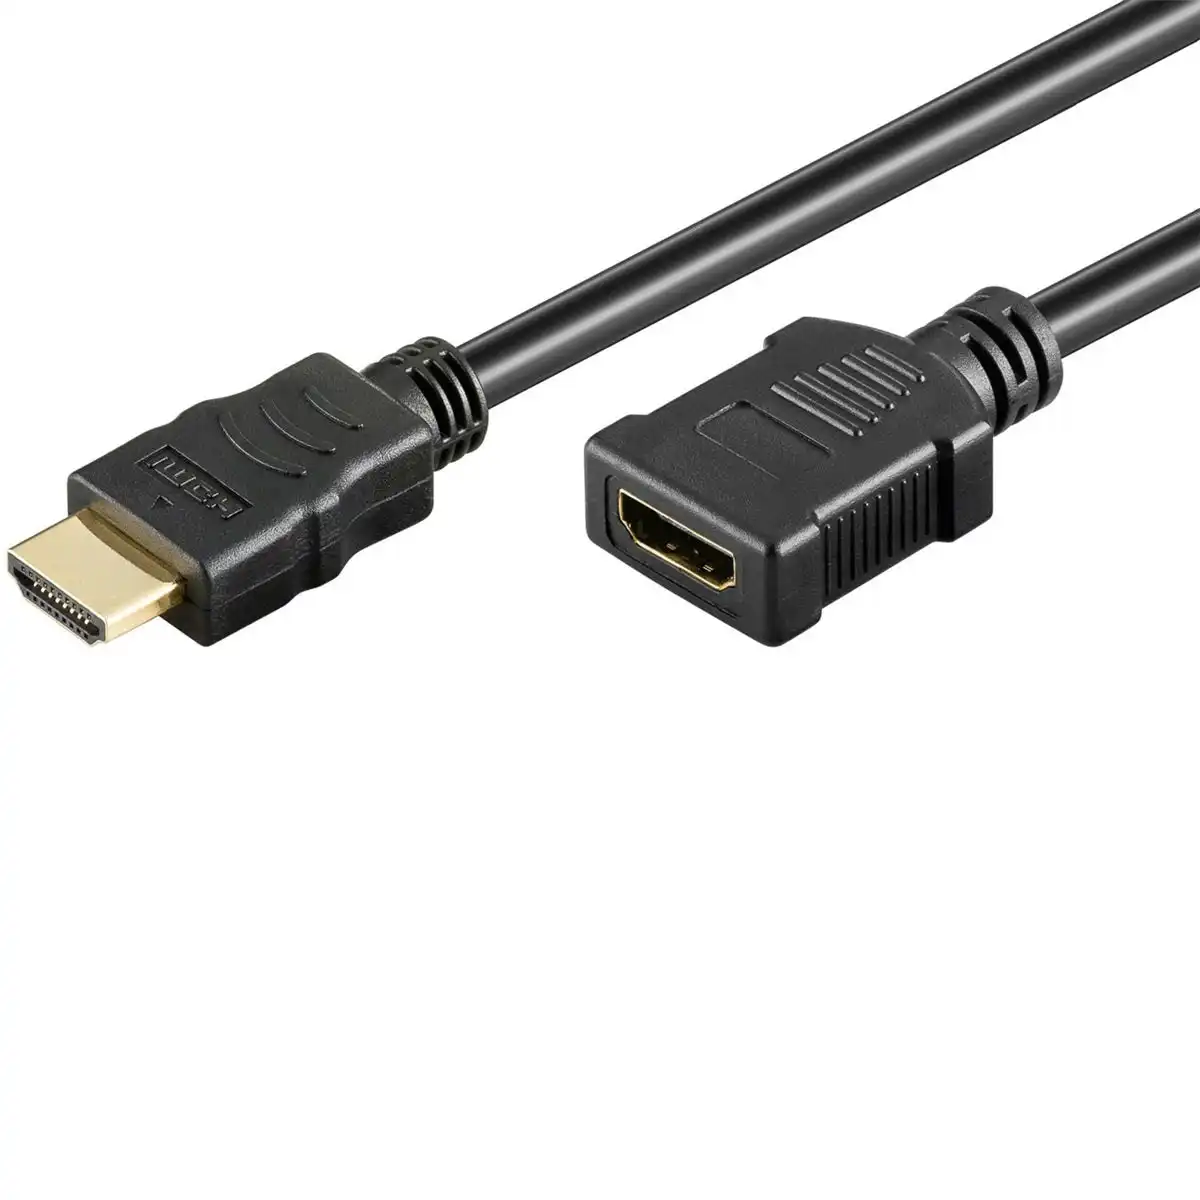 Goobay HDMI Male > Female Extension Cable - Black